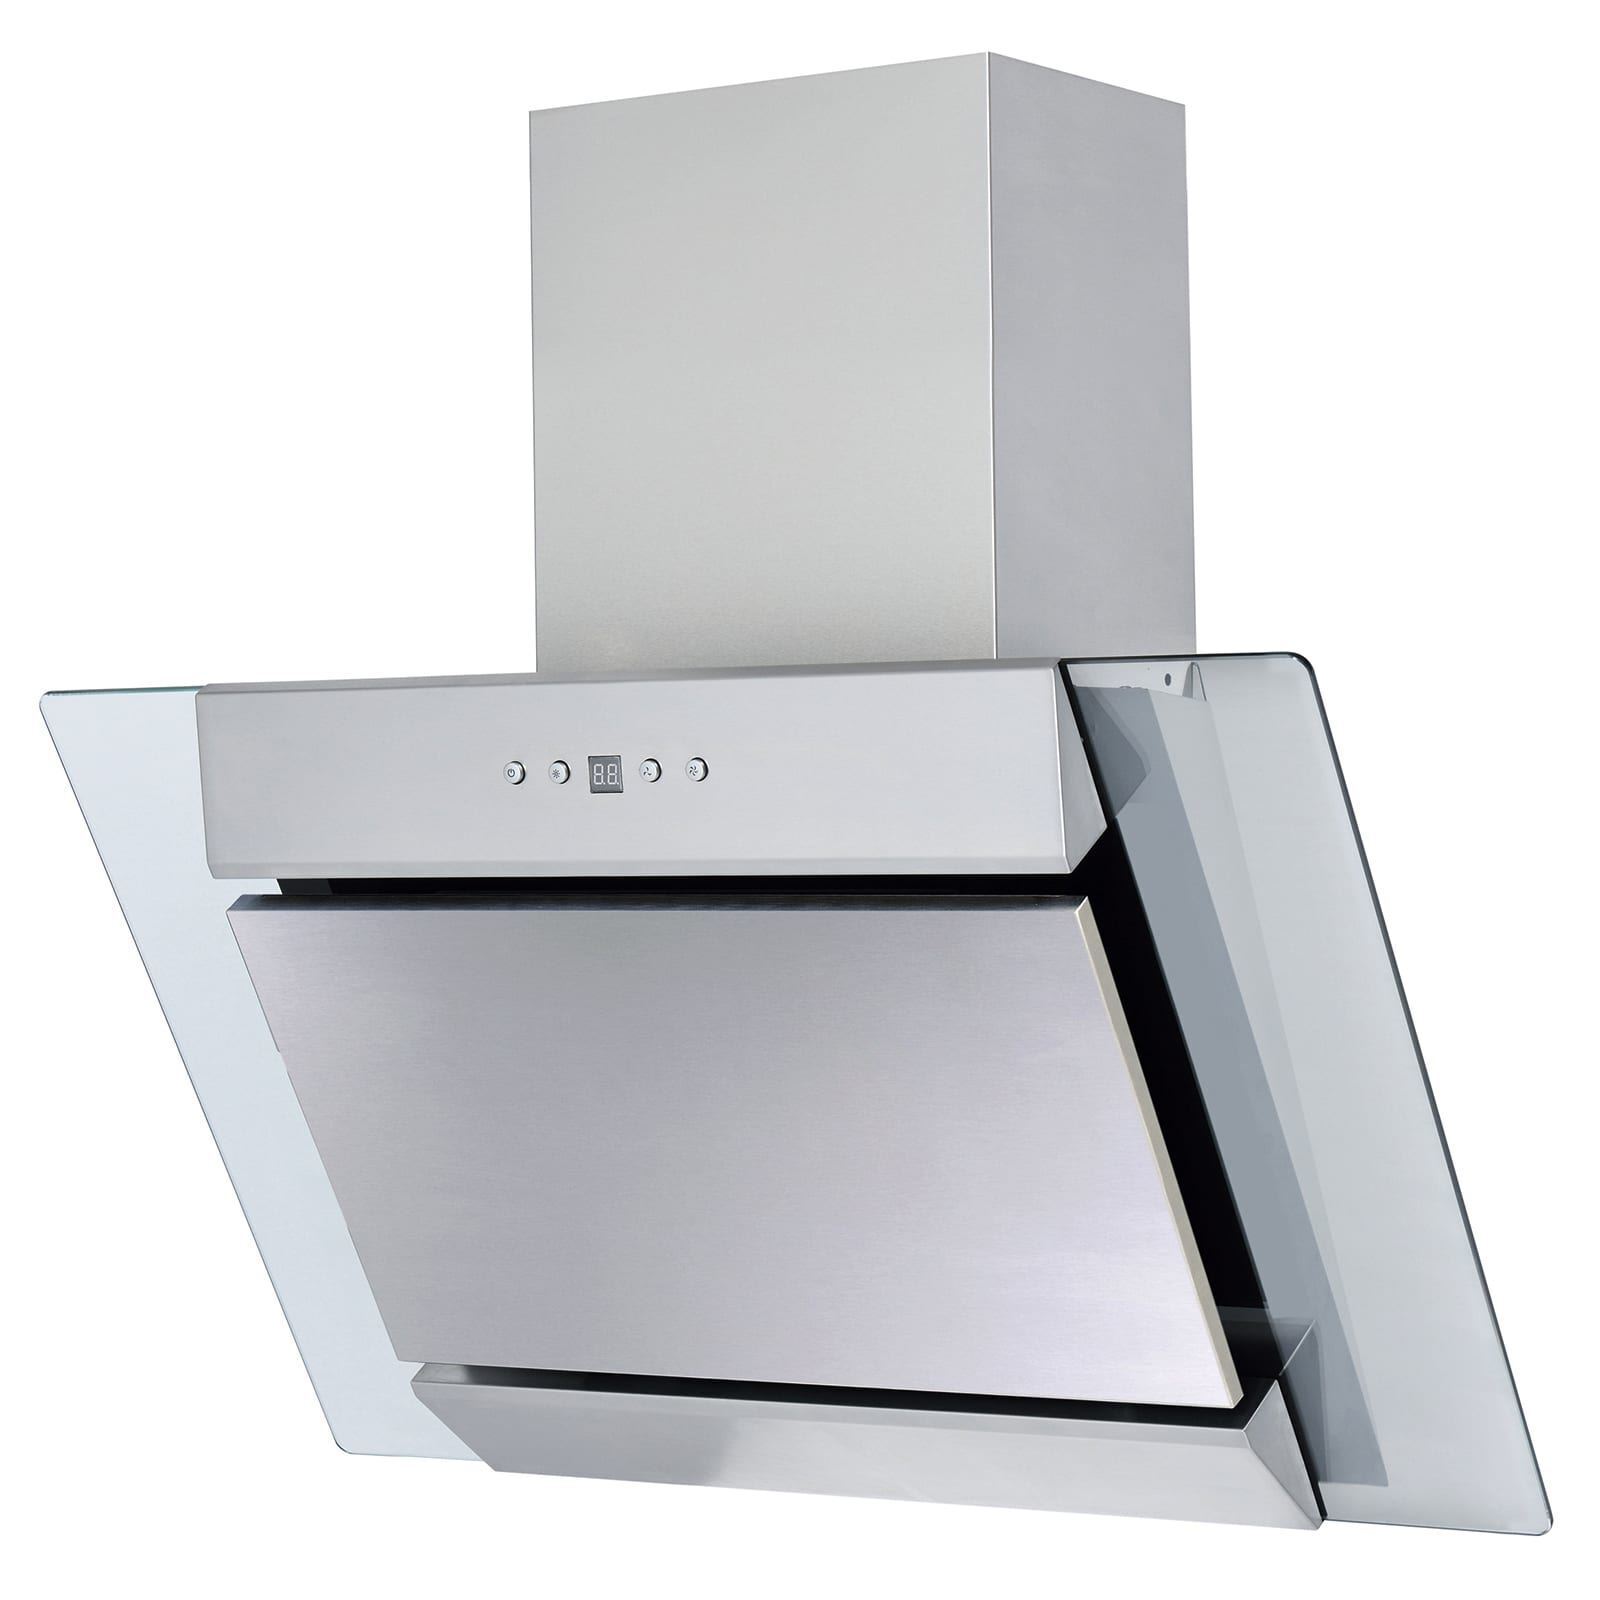 SIA AGL61SS Angled Cooker Hood - Stainless Steel